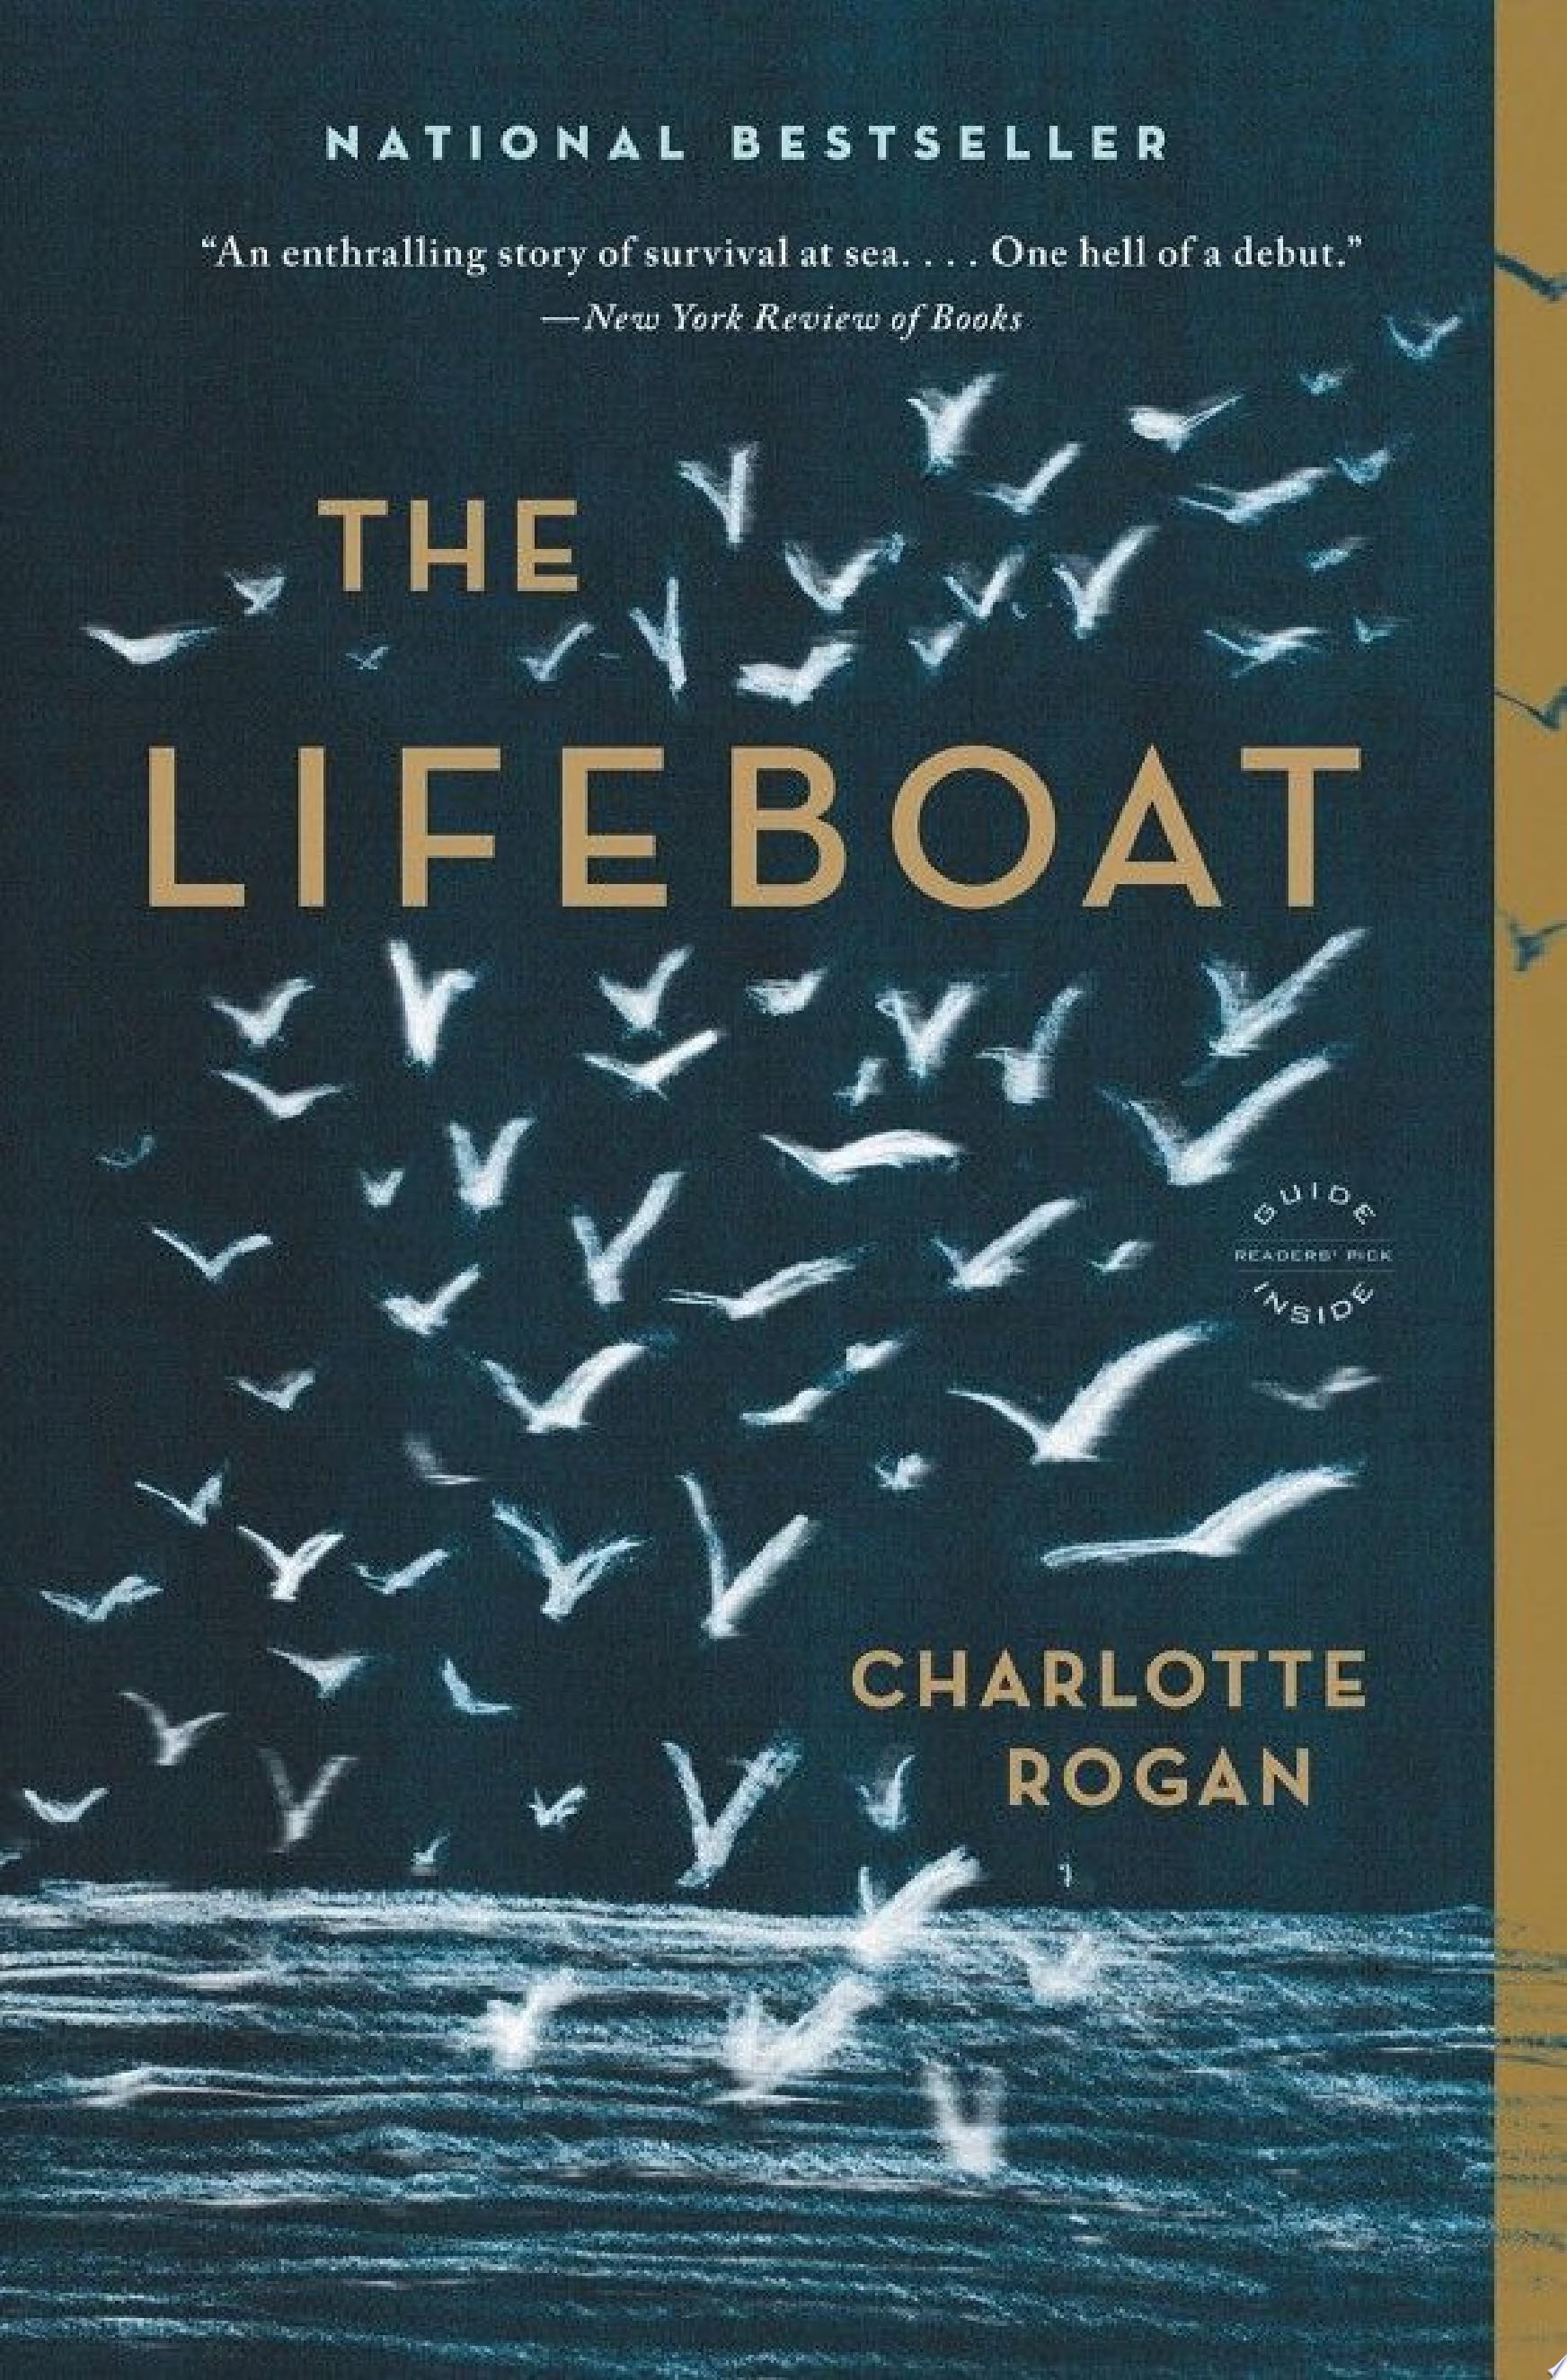 Image for "The Lifeboat"